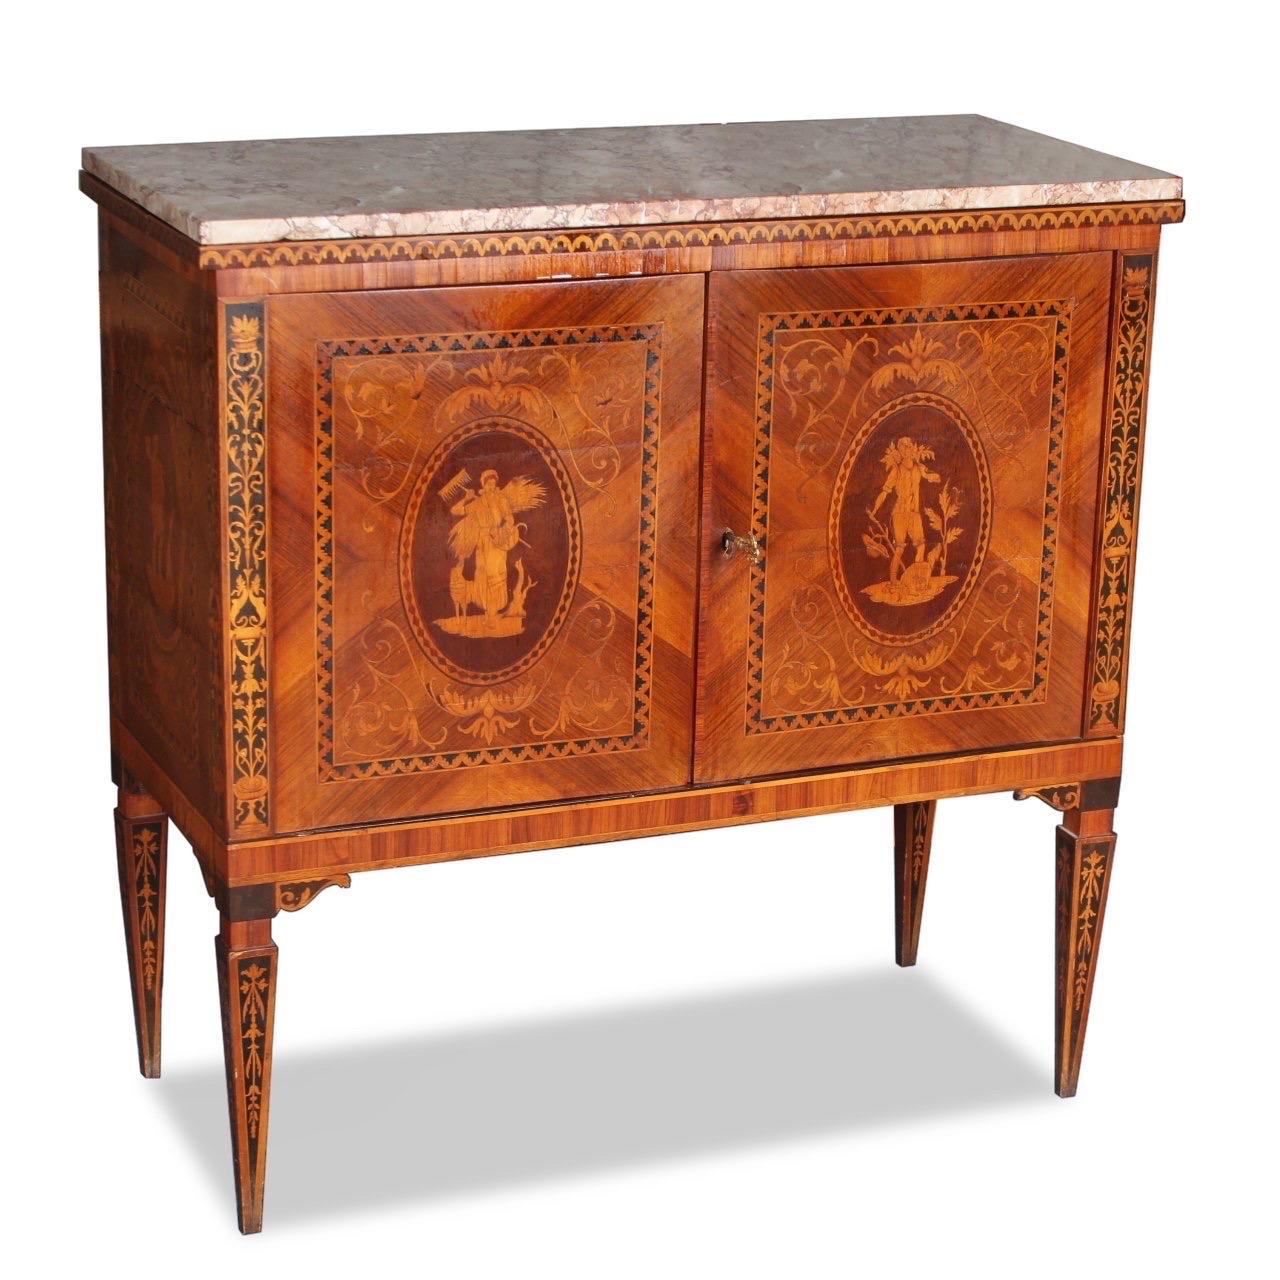 An antique Italian bar inlaid throughout with a rich, warm finish in walnut and palisander wood with neoclassical marquetry inlay, gilt accents and a cream ivory and rouge marble top. 

Handcrafted in Italy in the 19th century in the Italian